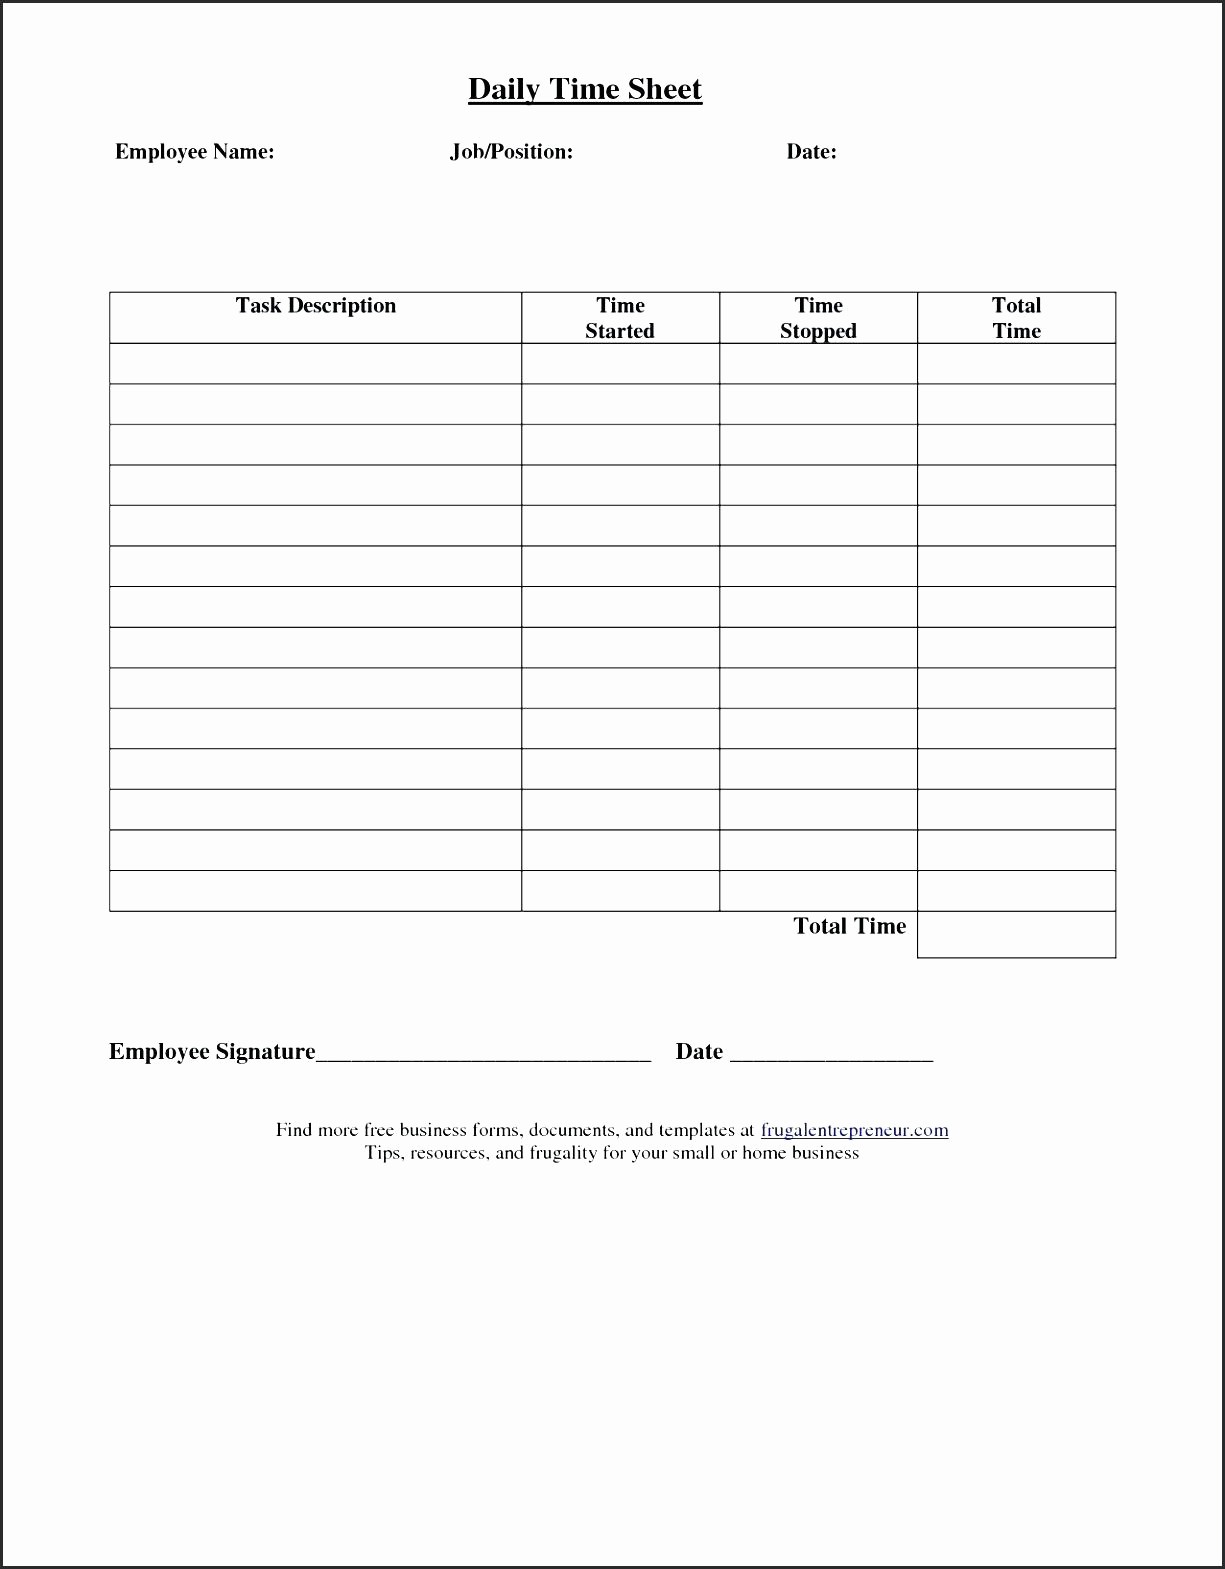 Free Printable Daily Time Sheets New Simple Time Sheets to Print Weekly Timesheet Template